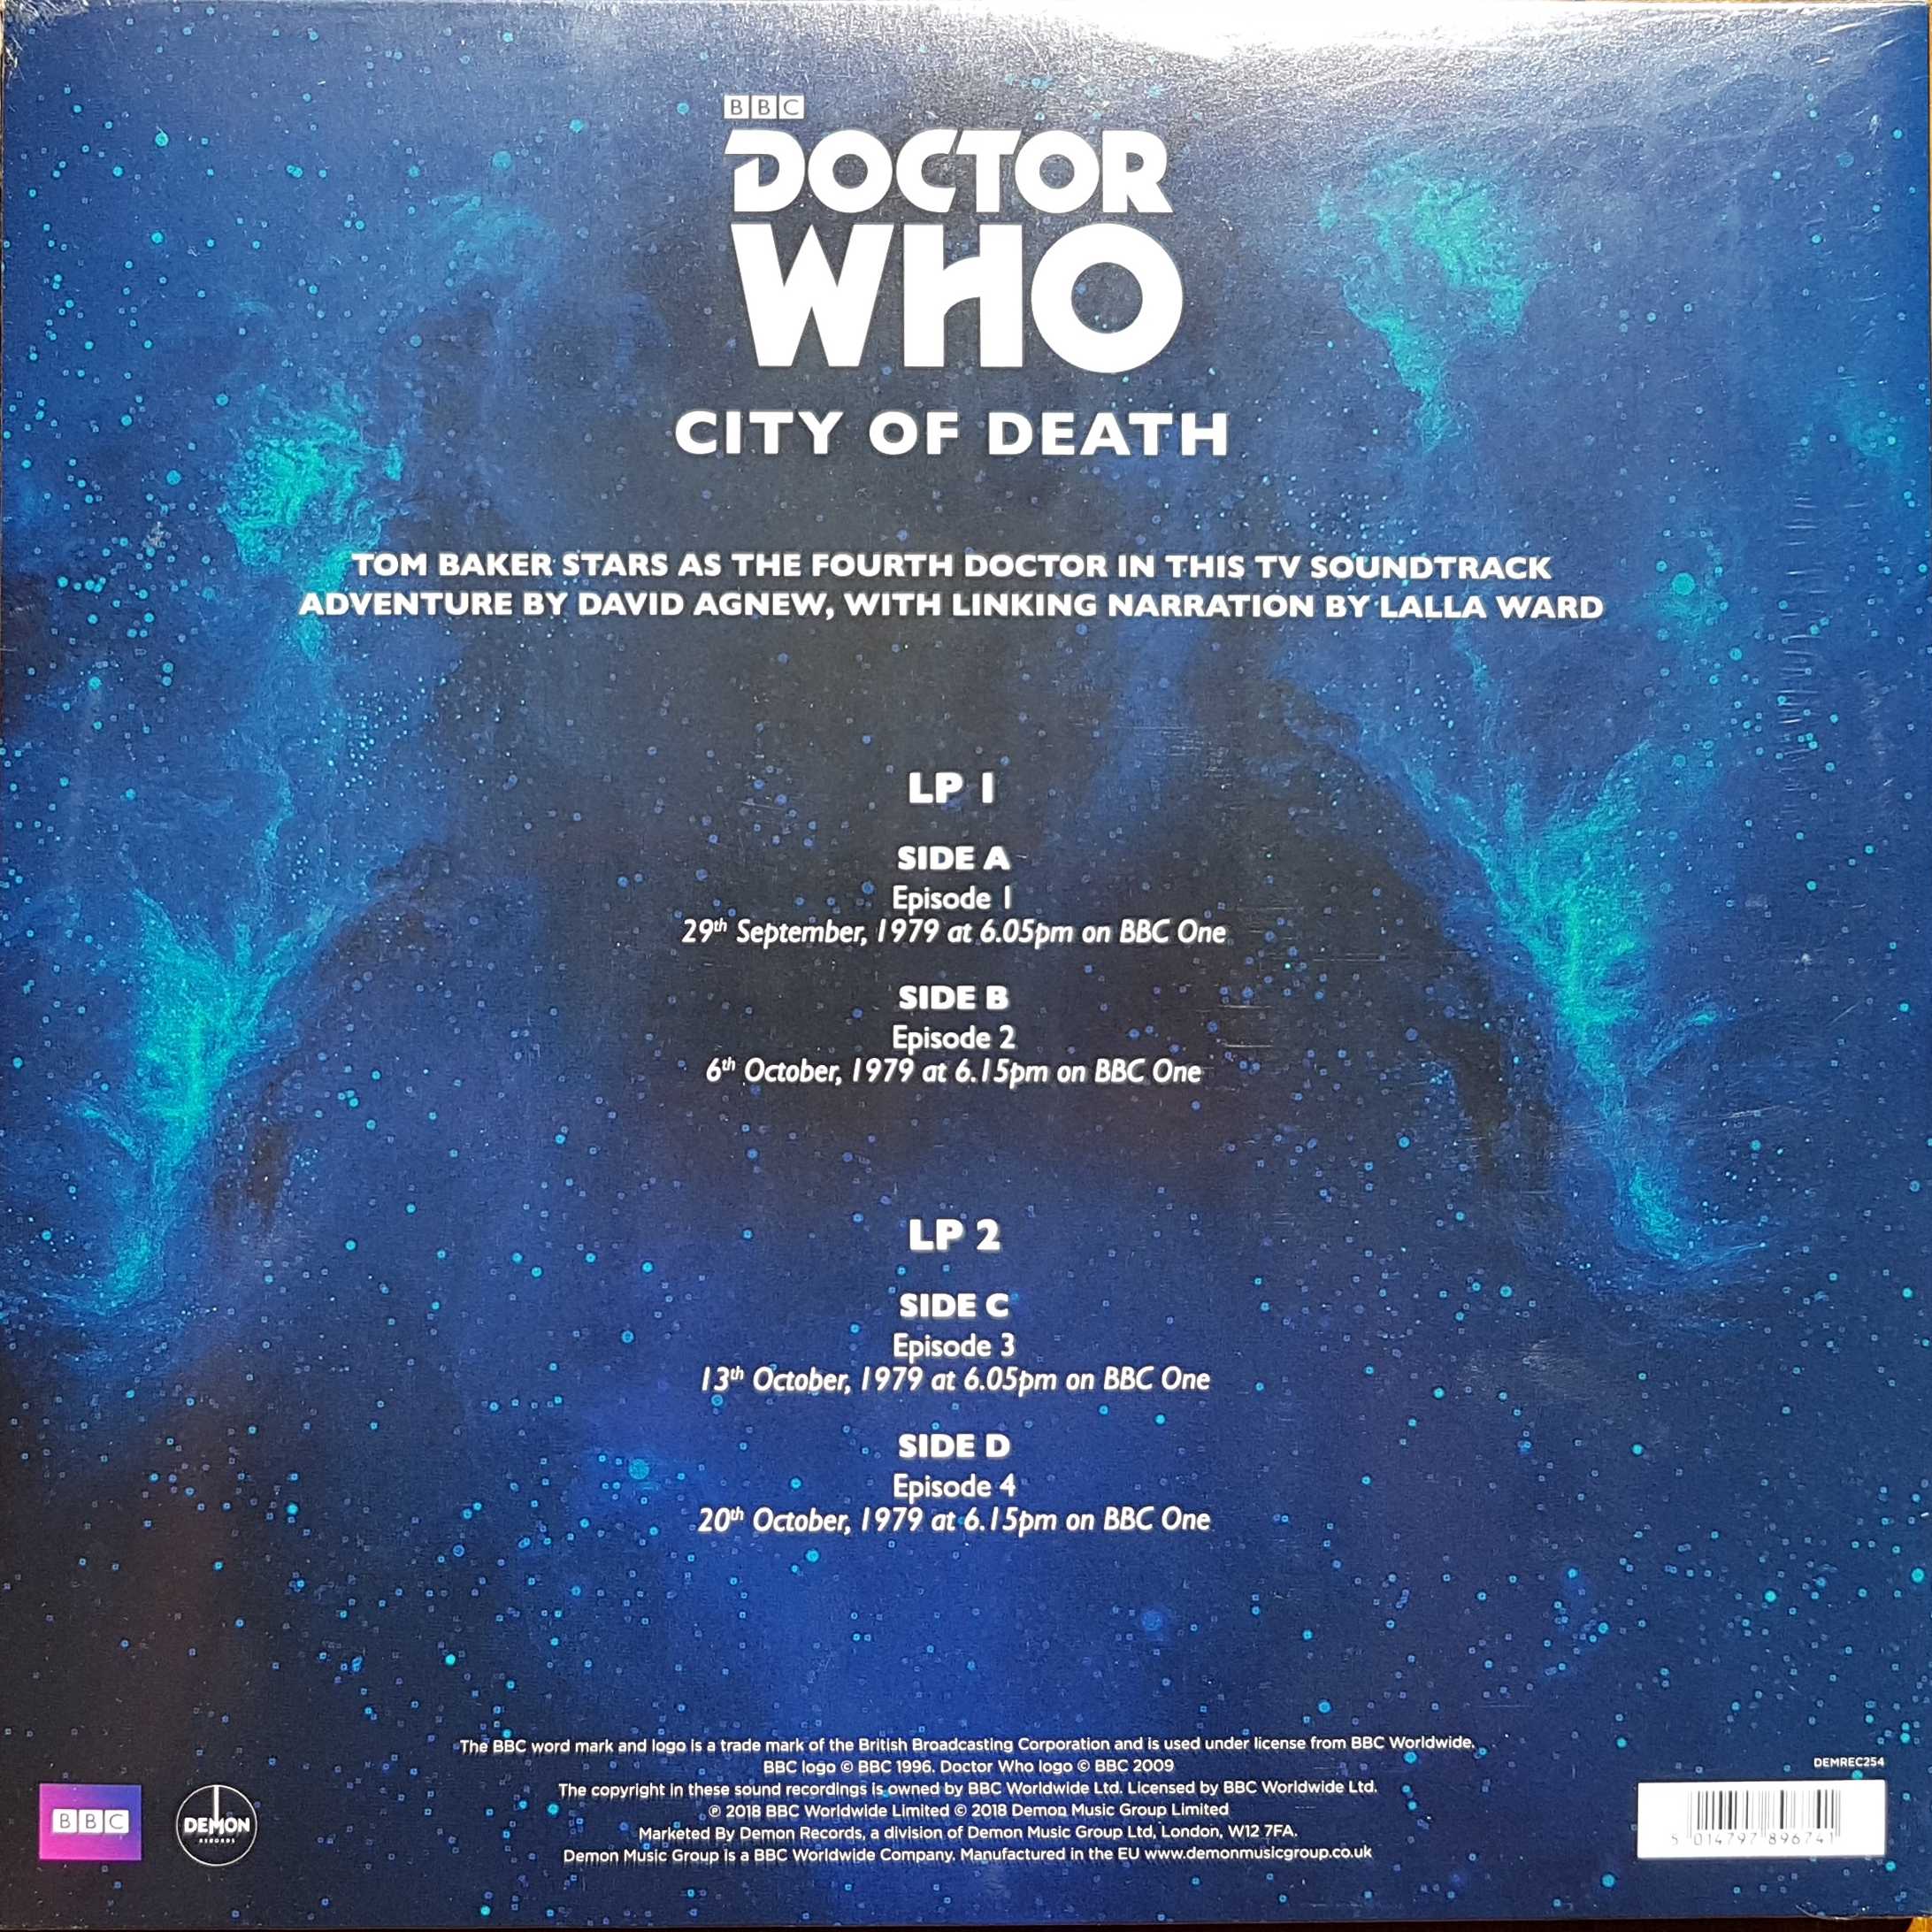 Picture of DEMREC 254 Doctor Who - City of death - Record Store Day 2018 by artist David Agnew from the BBC records and Tapes library